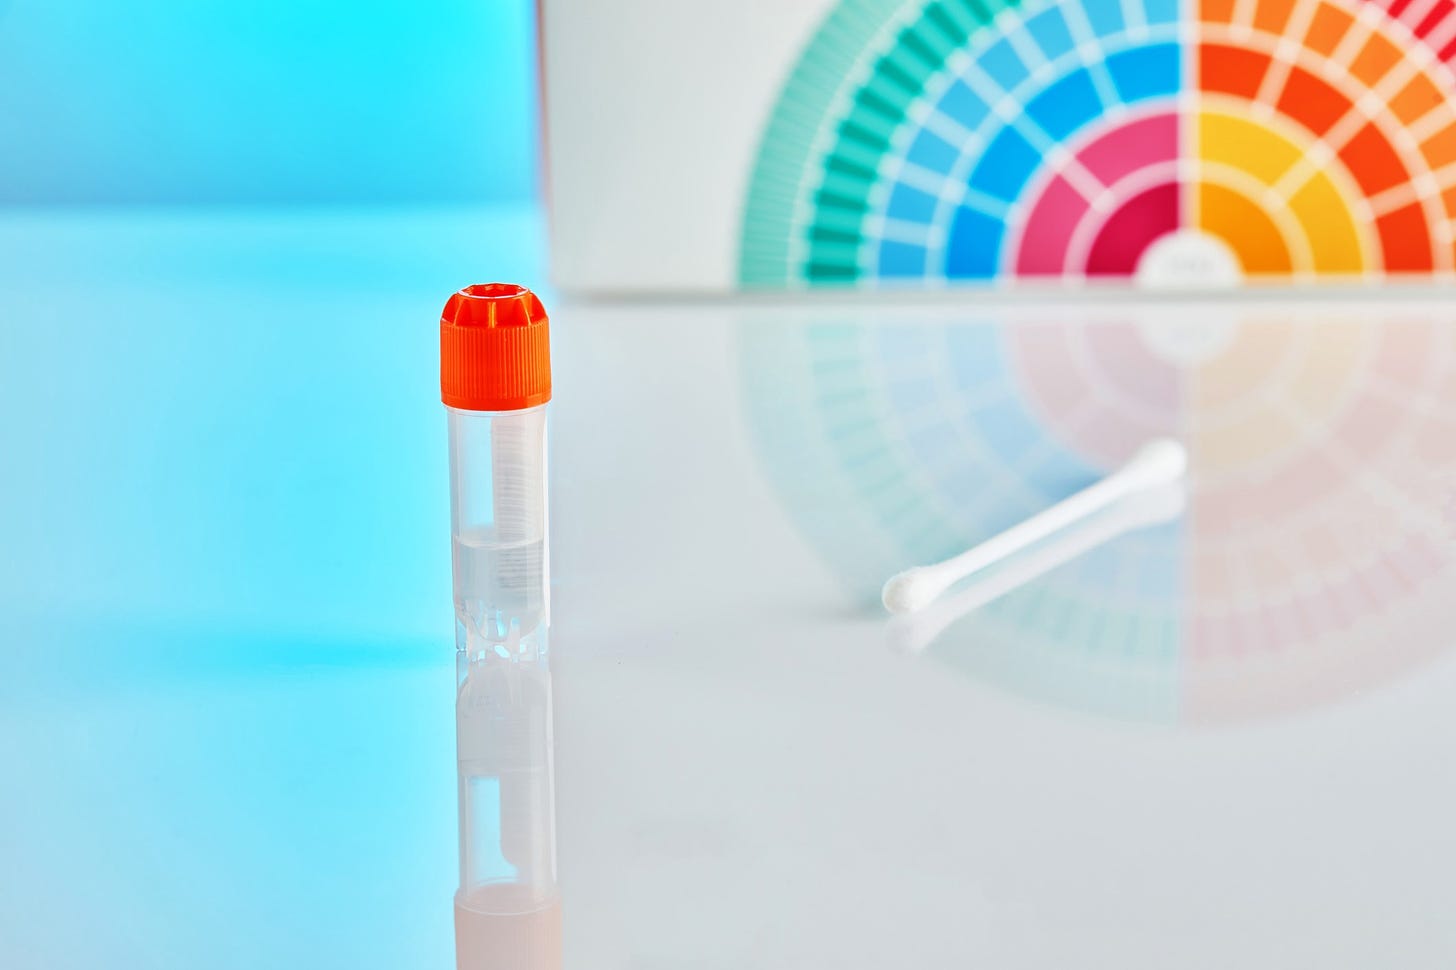 A test tube and swab stand against the background of a testing kit.